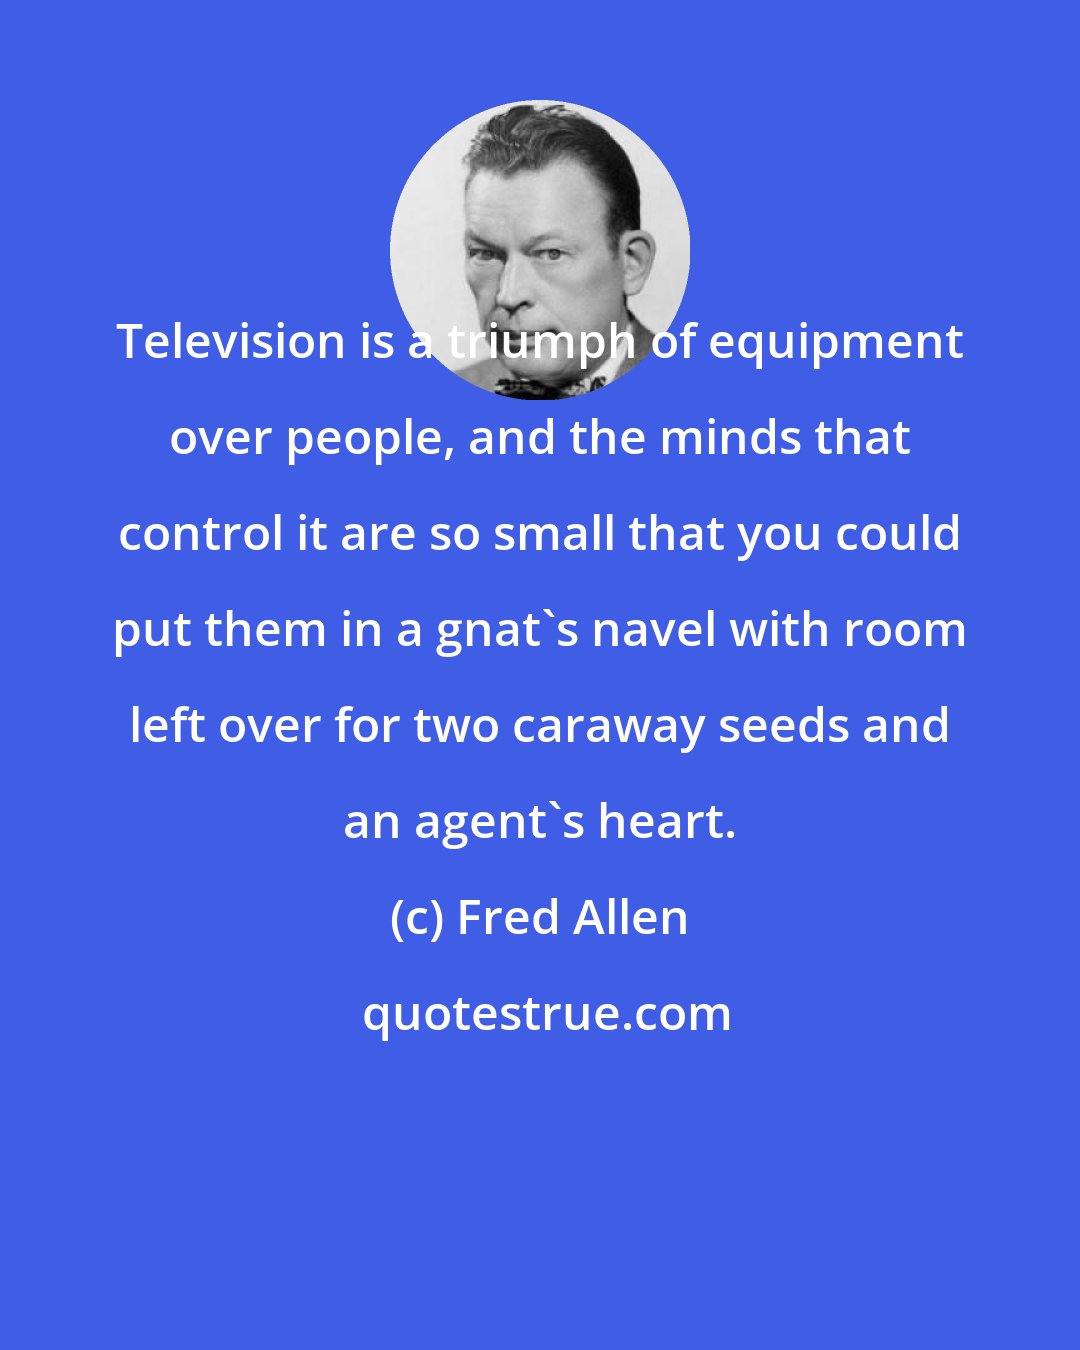 Fred Allen: Television is a triumph of equipment over people, and the minds that control it are so small that you could put them in a gnat's navel with room left over for two caraway seeds and an agent's heart.